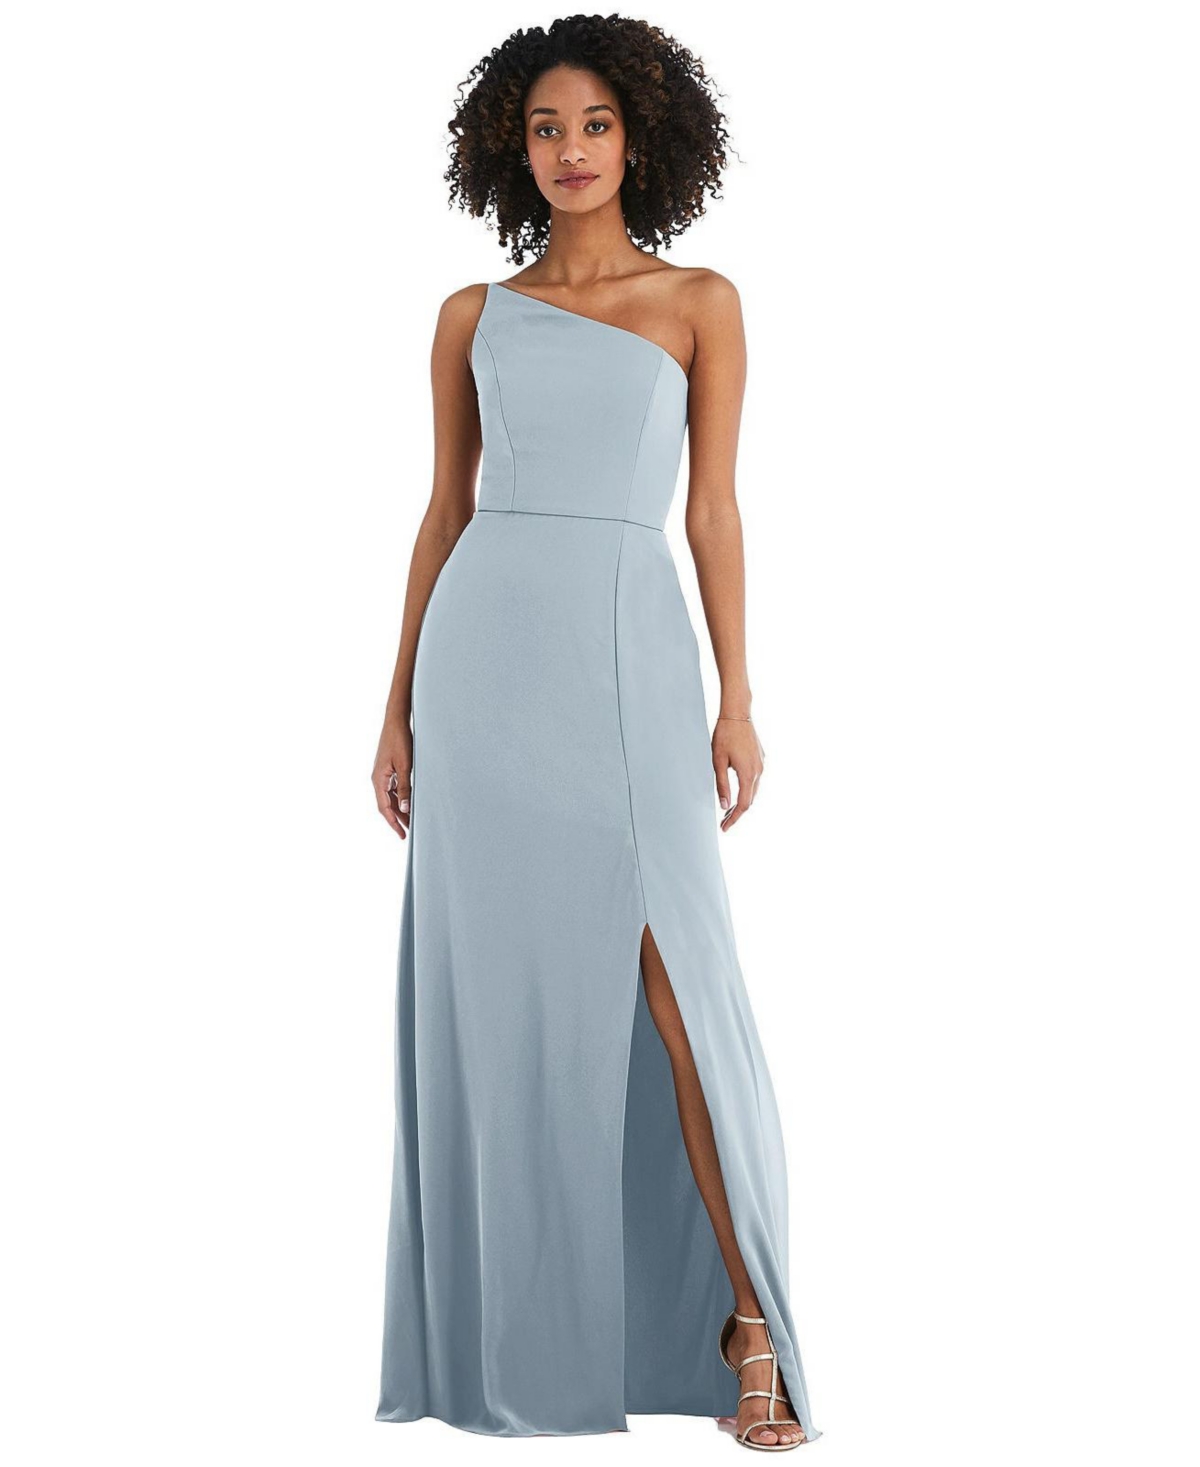 Women's Skinny One-Shoulder Trumpet Gown with Front Slit - Vineyard green